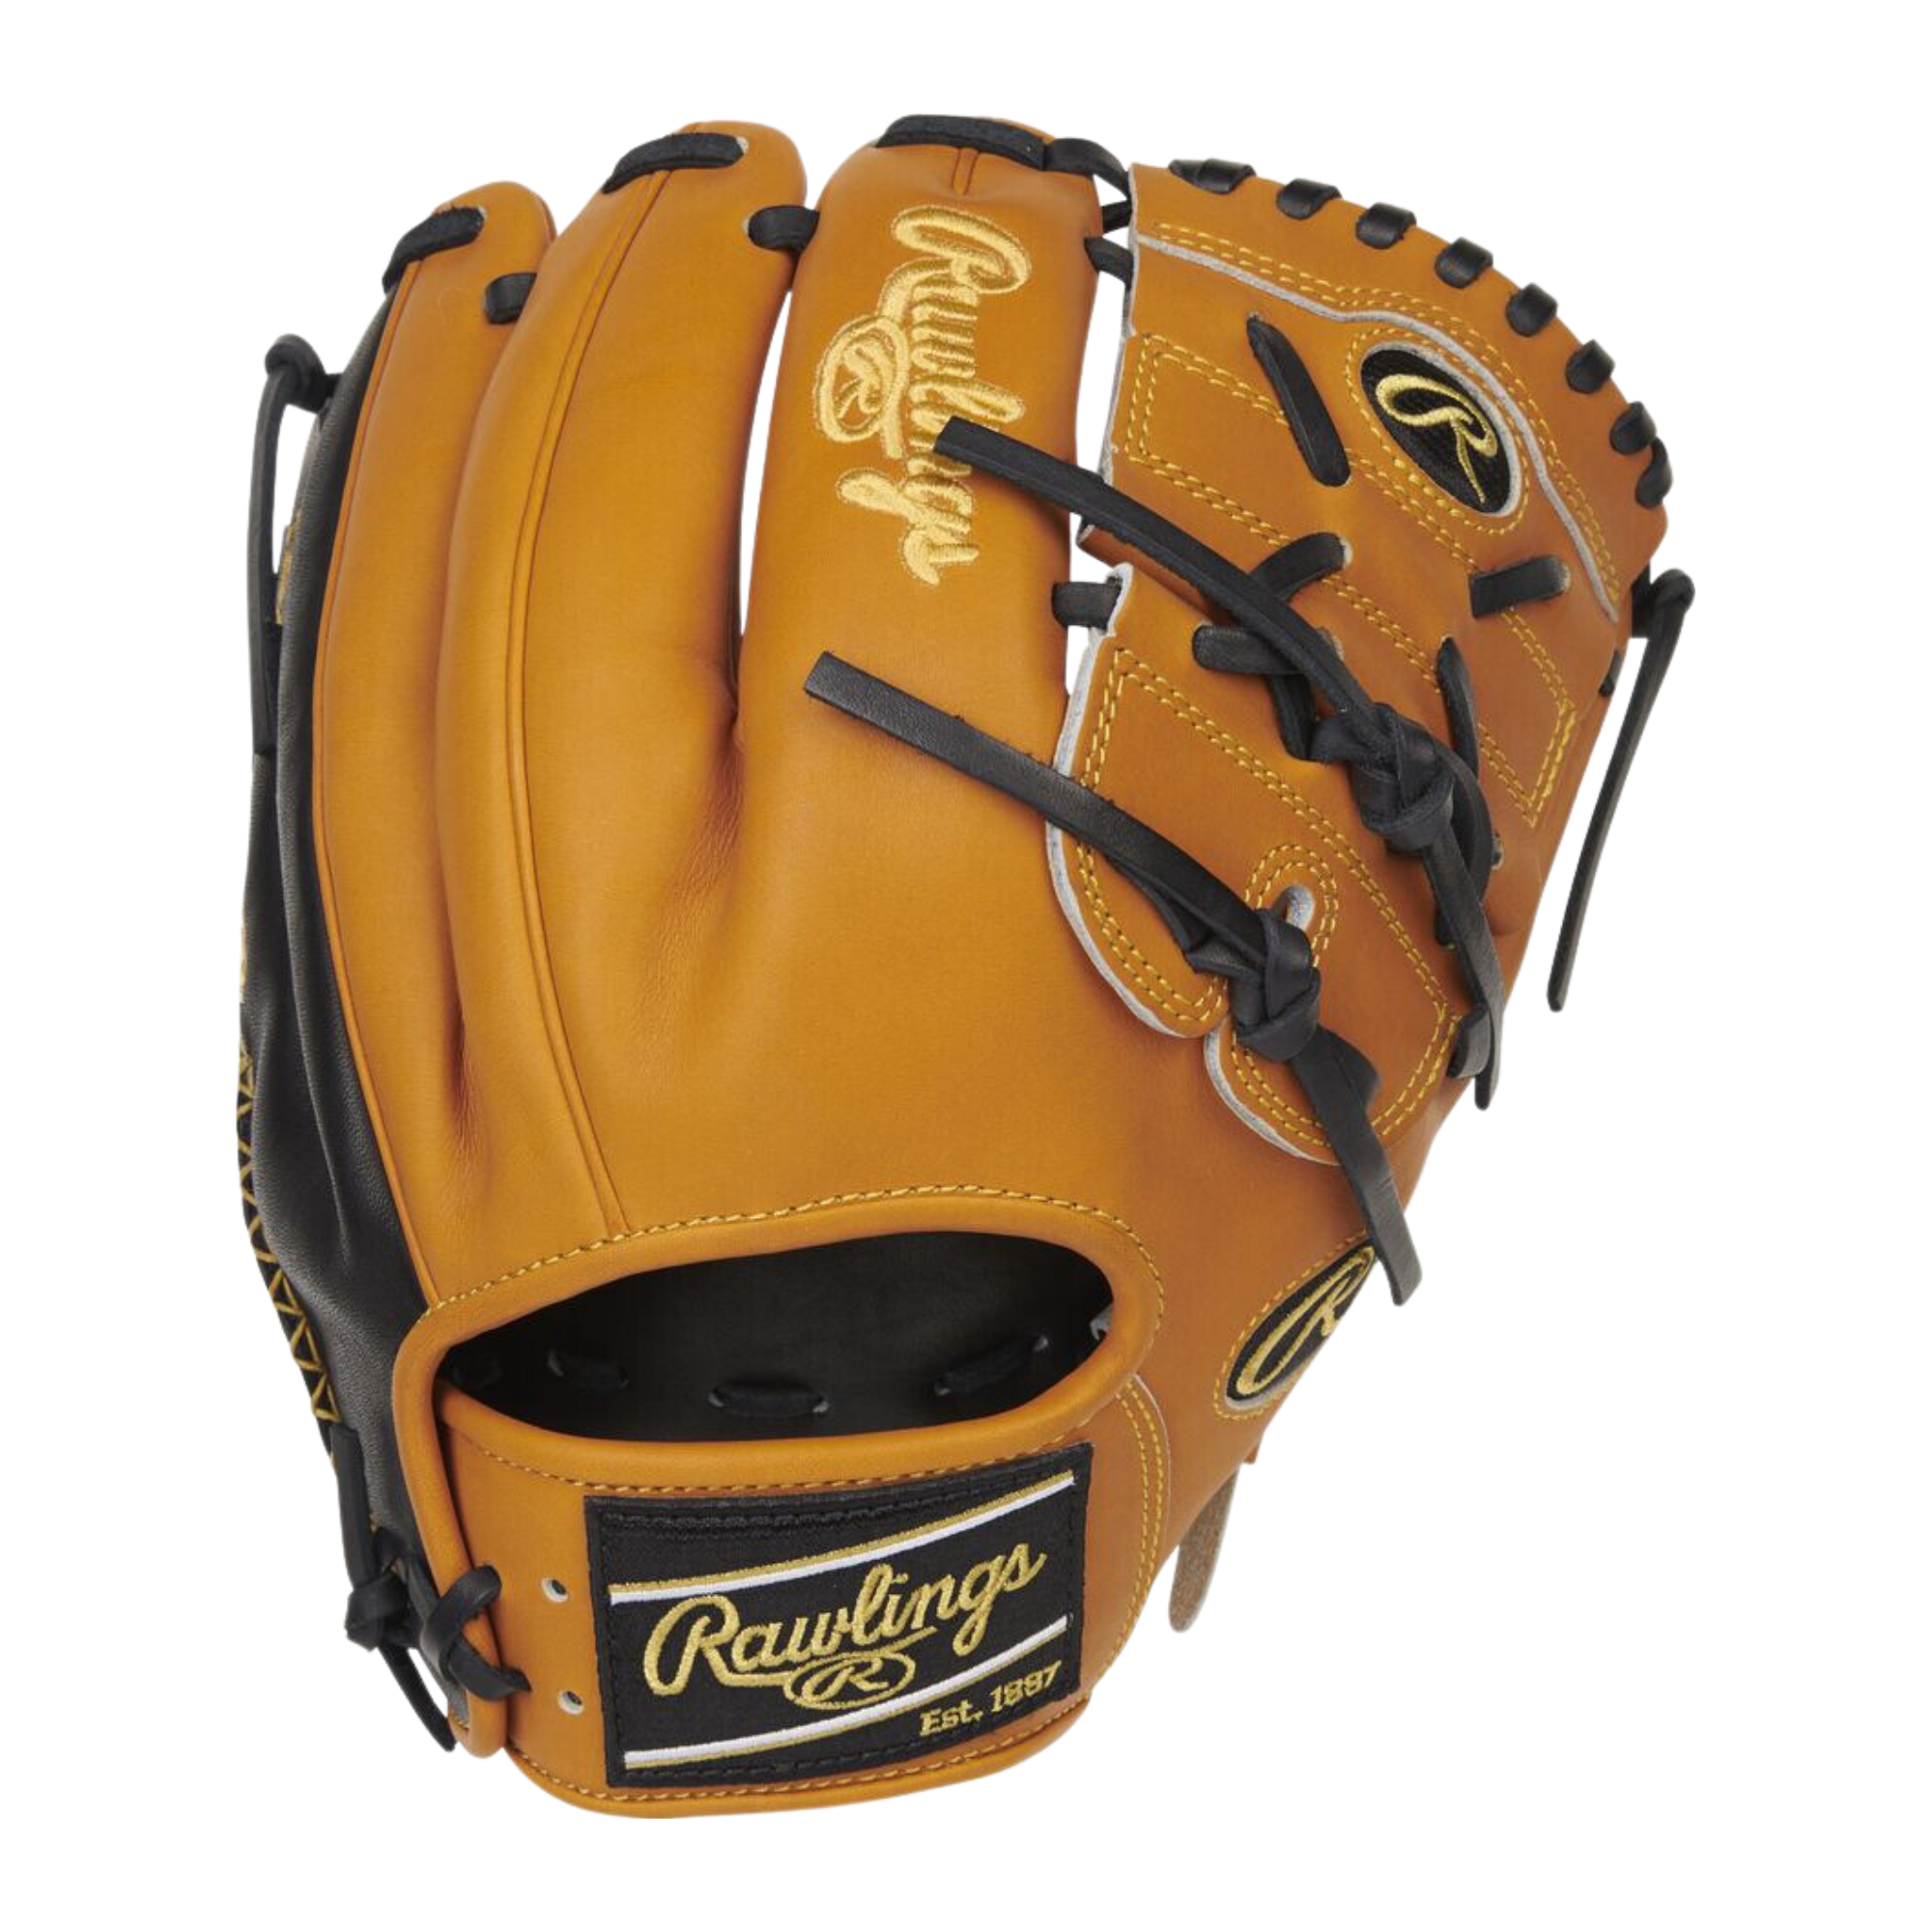 Rawlings Heart of the Hide 11.75-inch Pitcher's Glove LHT